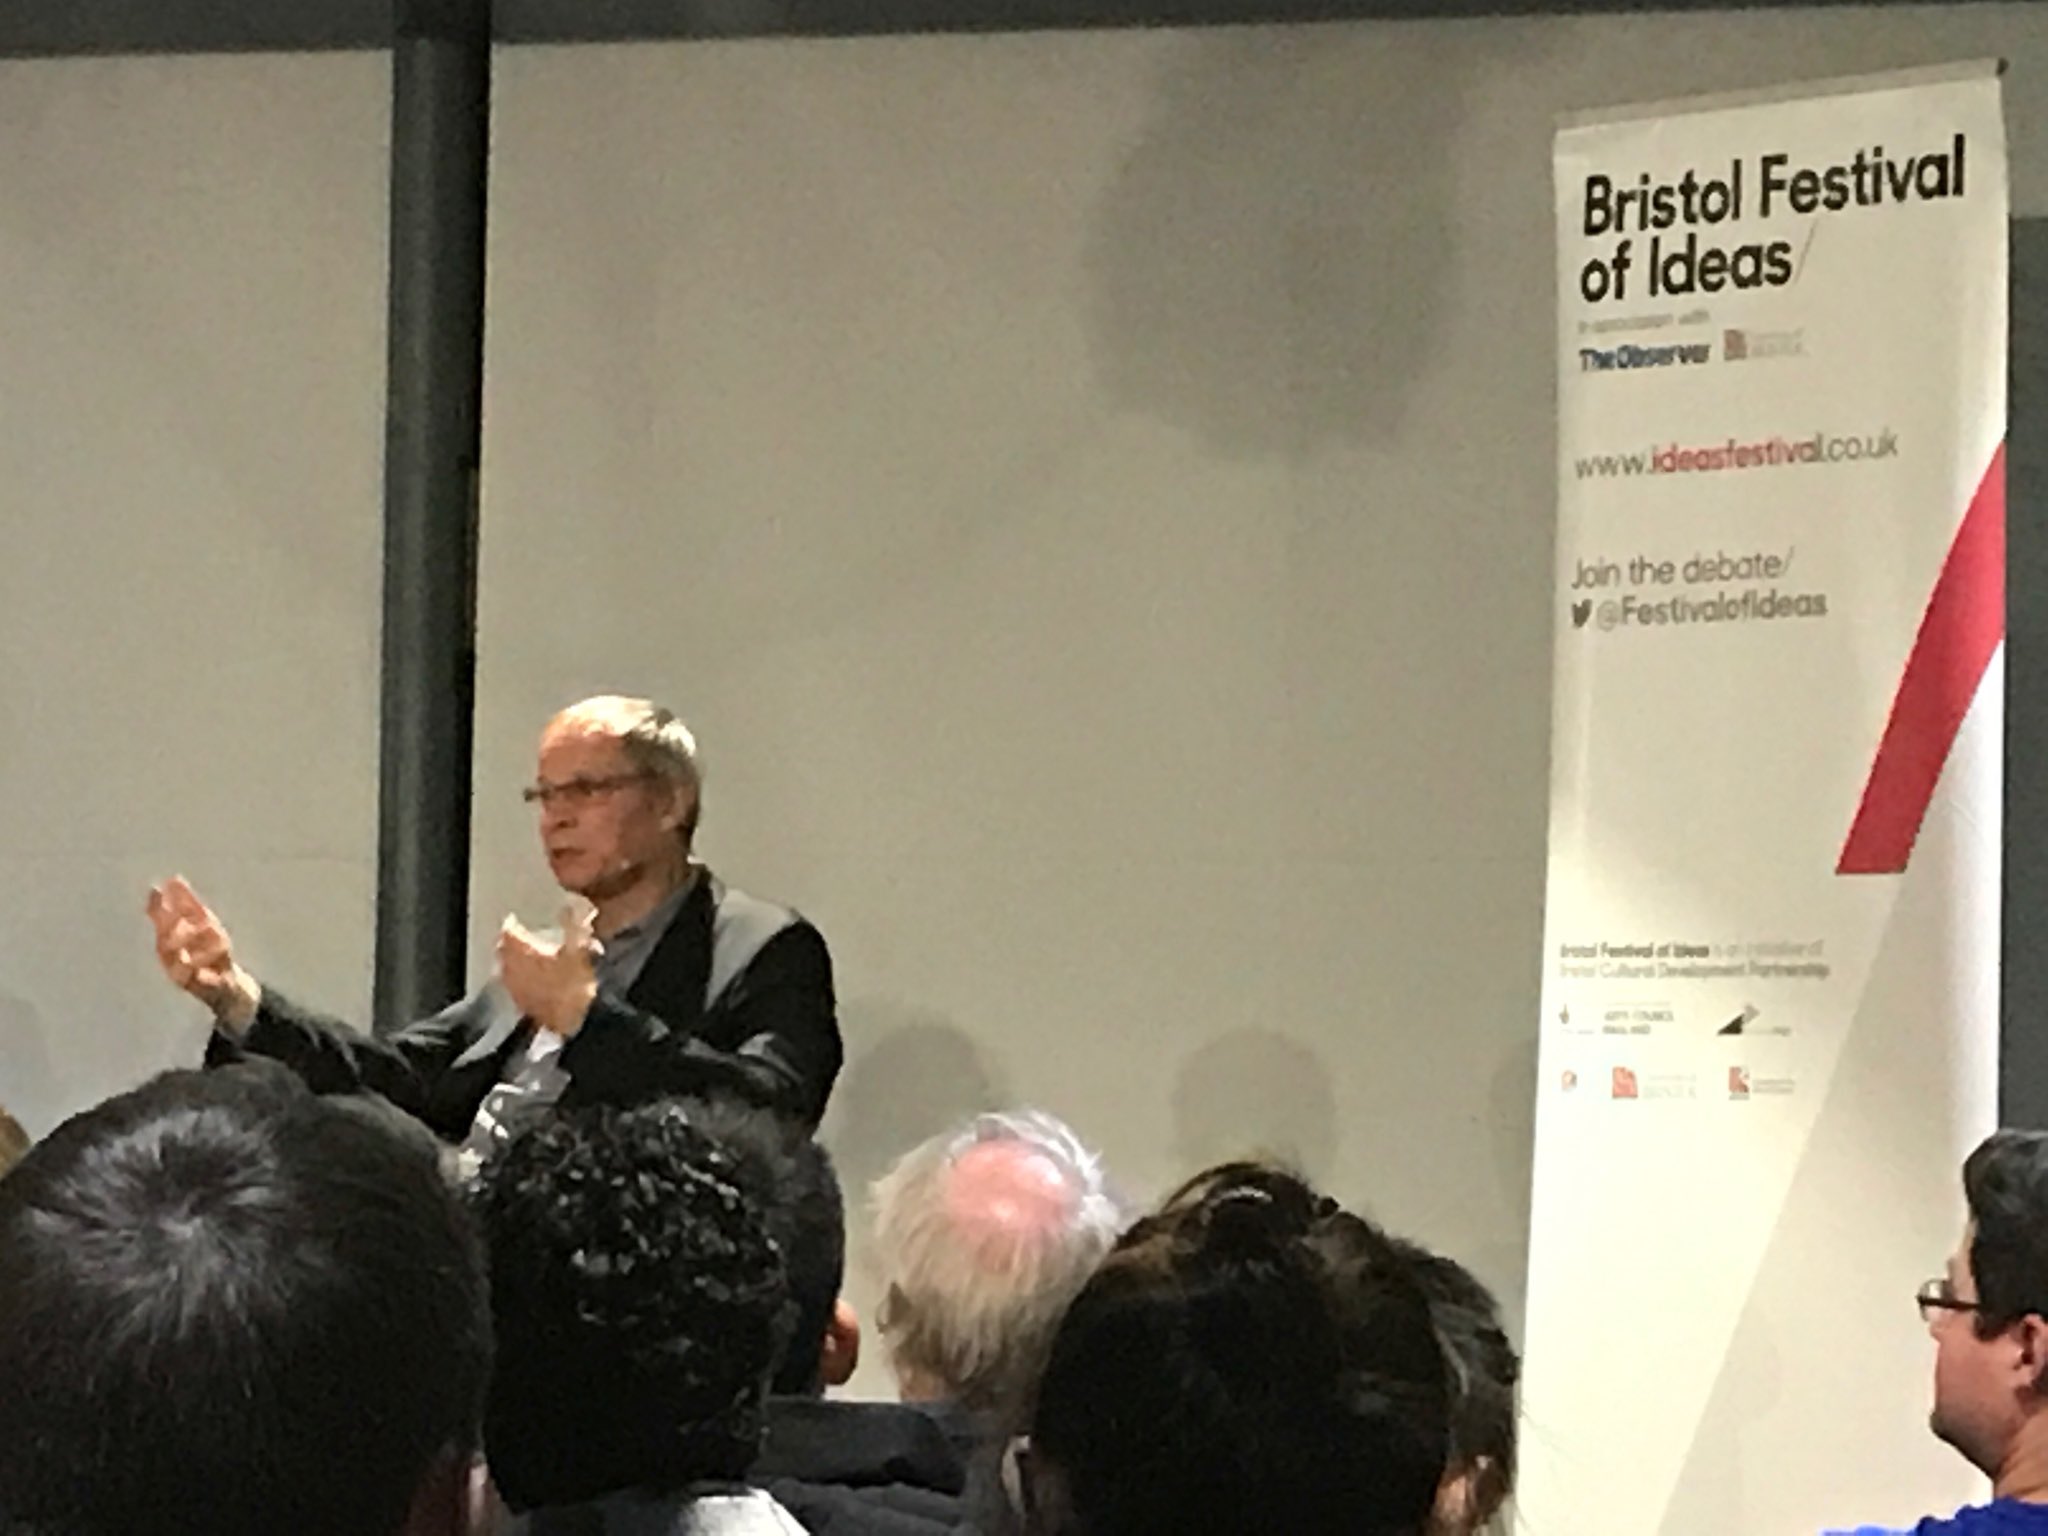 #economicsfest will people learn, says Jean Tirole (hint: no) https://t.co/CuSyRxPftP